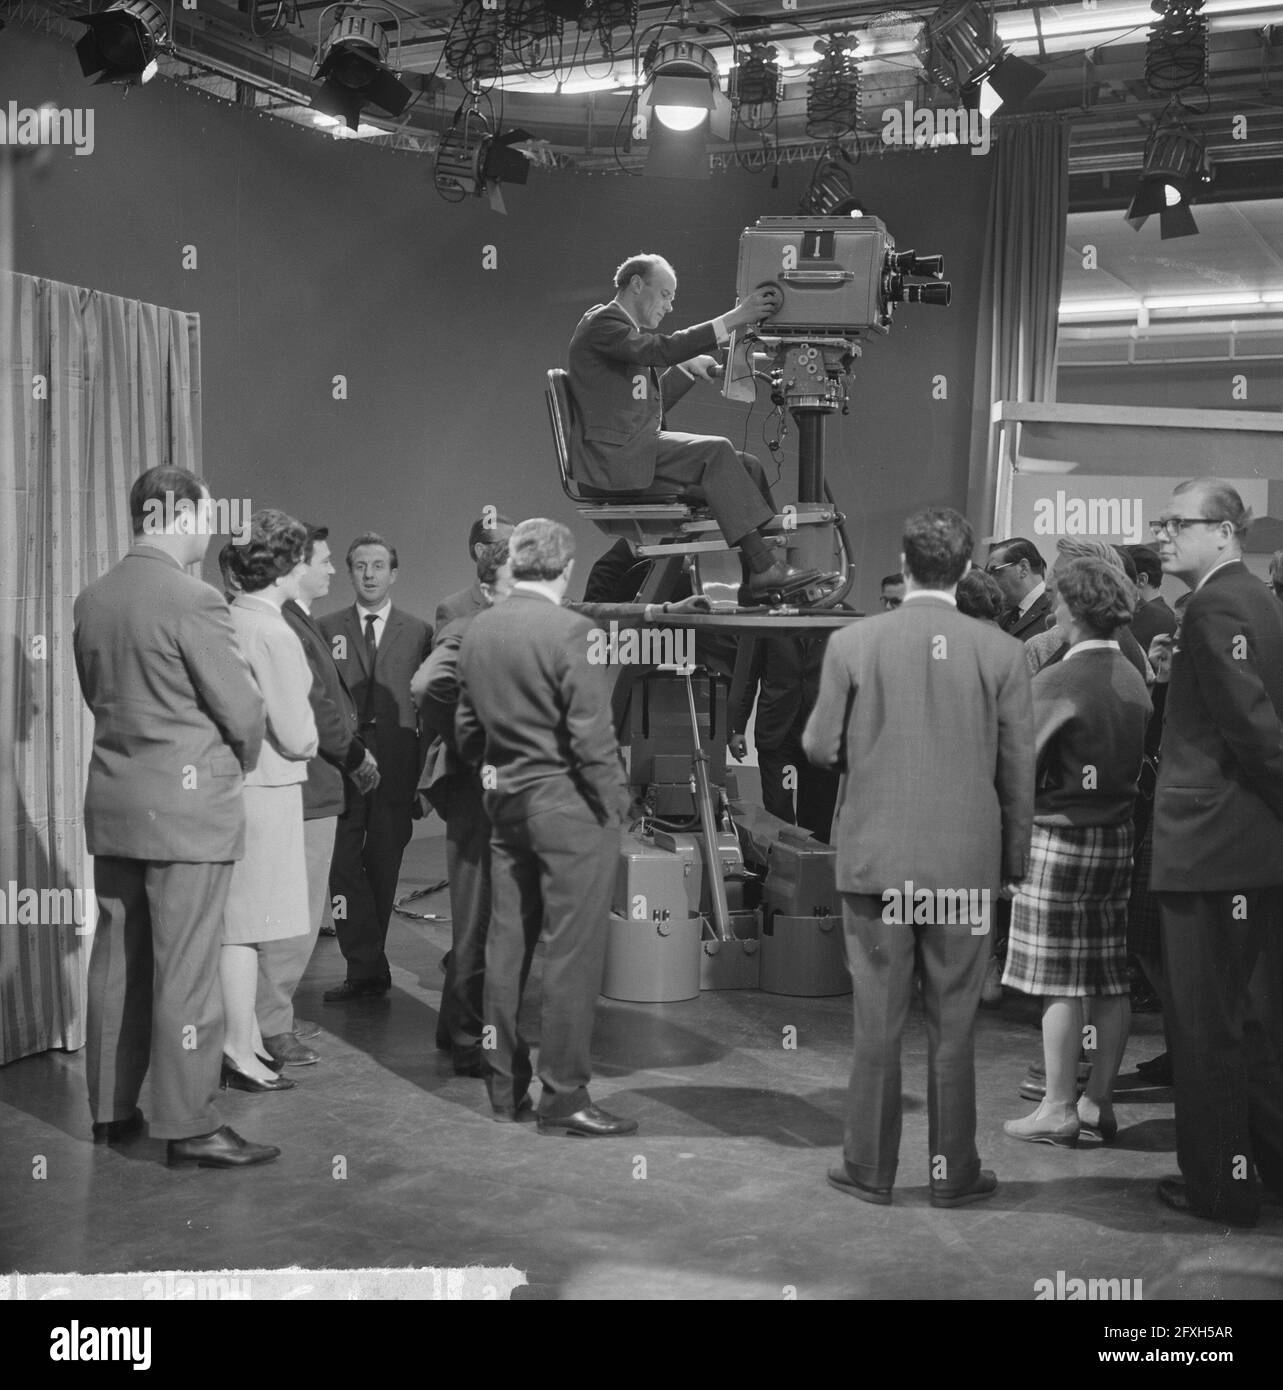 Fully automatic TV camera, April 18, 1963, TV cameras, The Netherlands,  20th century press agency photo, news to remember, documentary, historic  photography 1945-1990, visual stories, human history of the Twentieth  Century, capturing